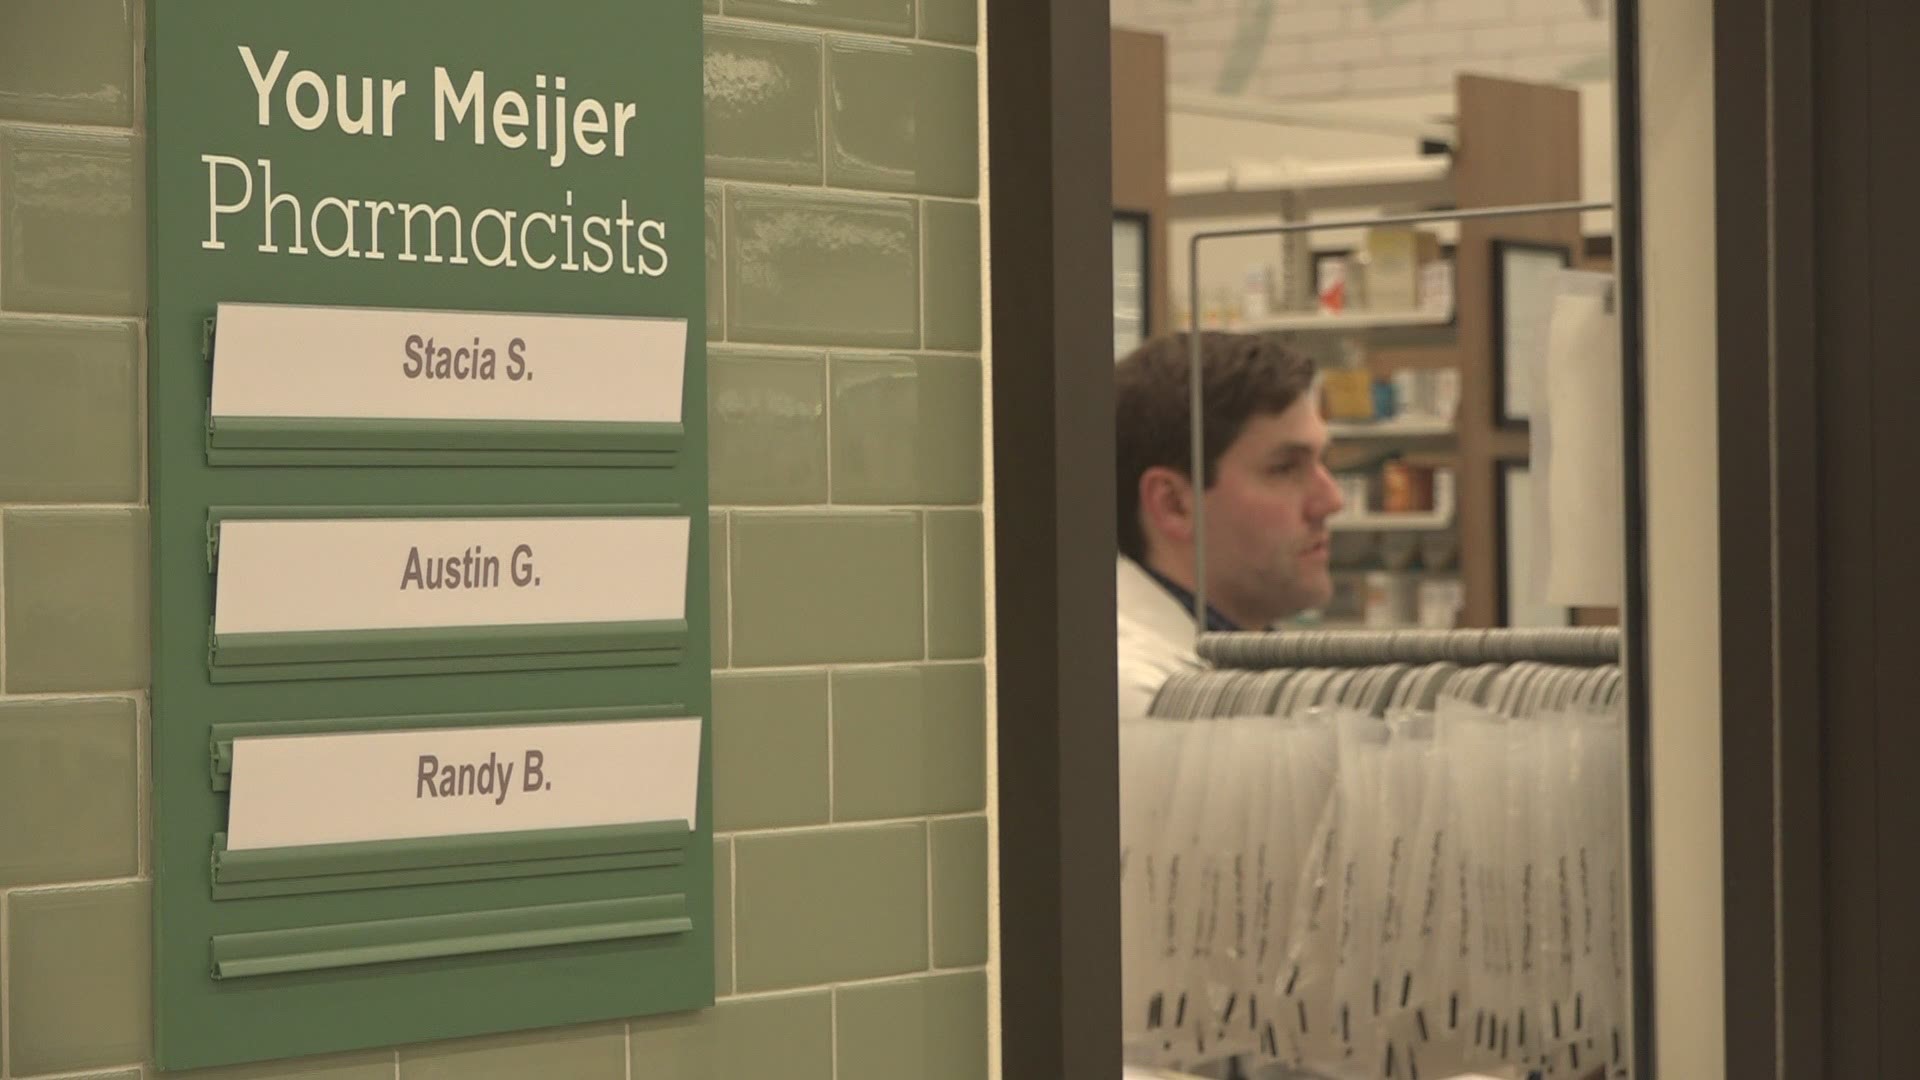 Gov. Gretchen Whitmer announced Wednesday that Meijer has been chosen by the state as an initial pharmacy partner to help with administration of the COVID-19 vaccine